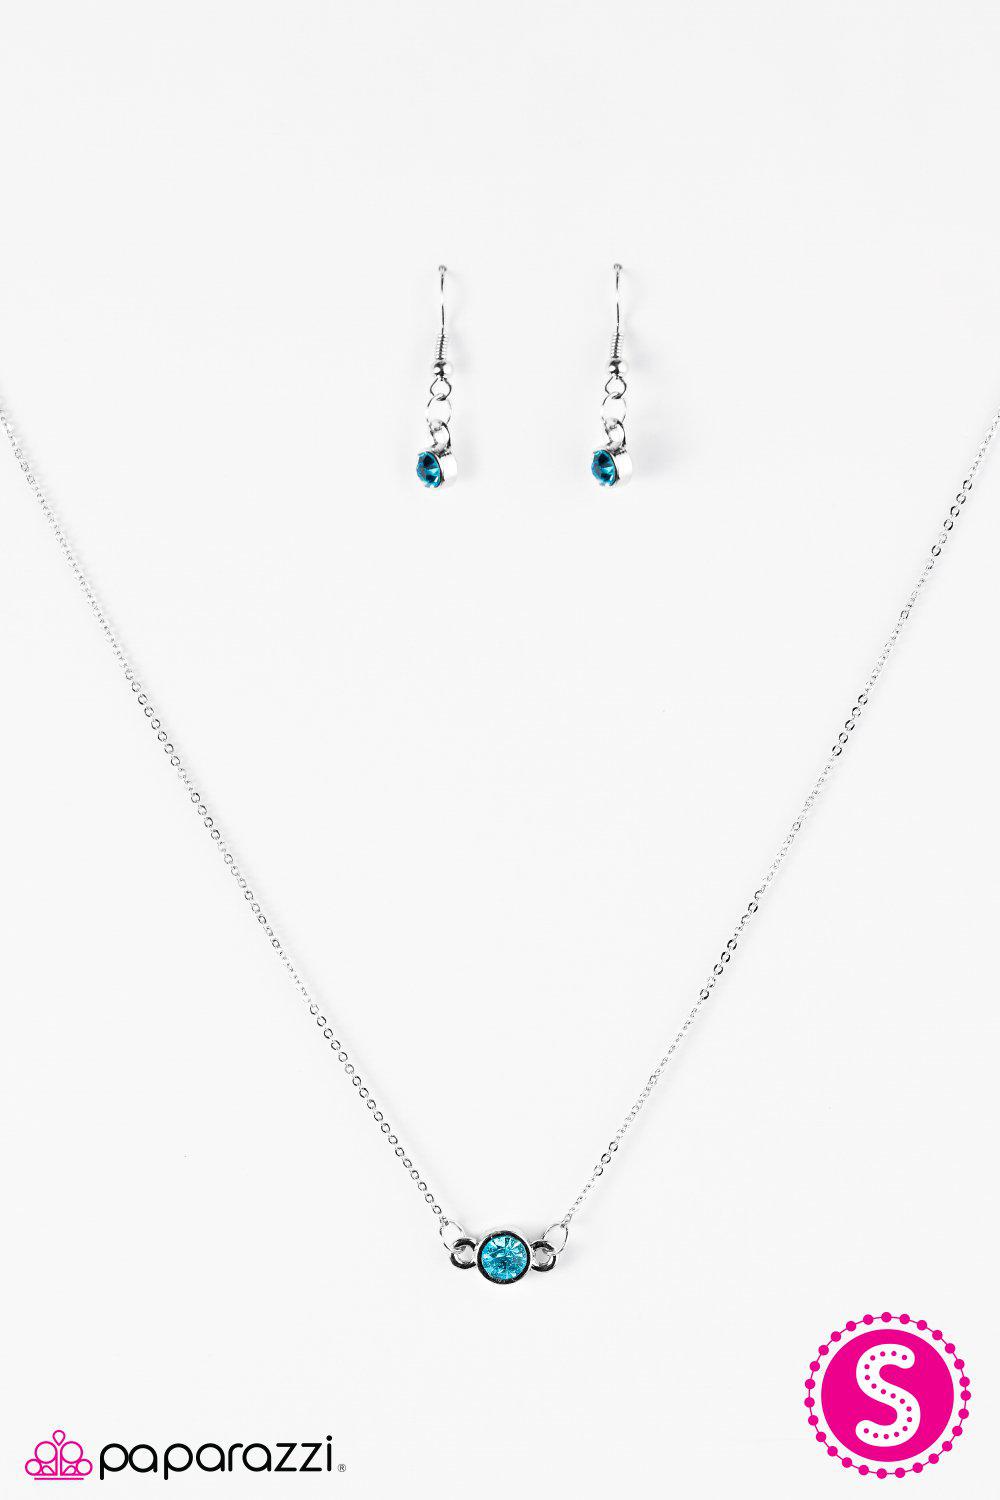 Beyond The Stars Blue Gem and Silver Necklace - Paparazzi Accessories-CarasShop.com - $5 Jewelry by Cara Jewels